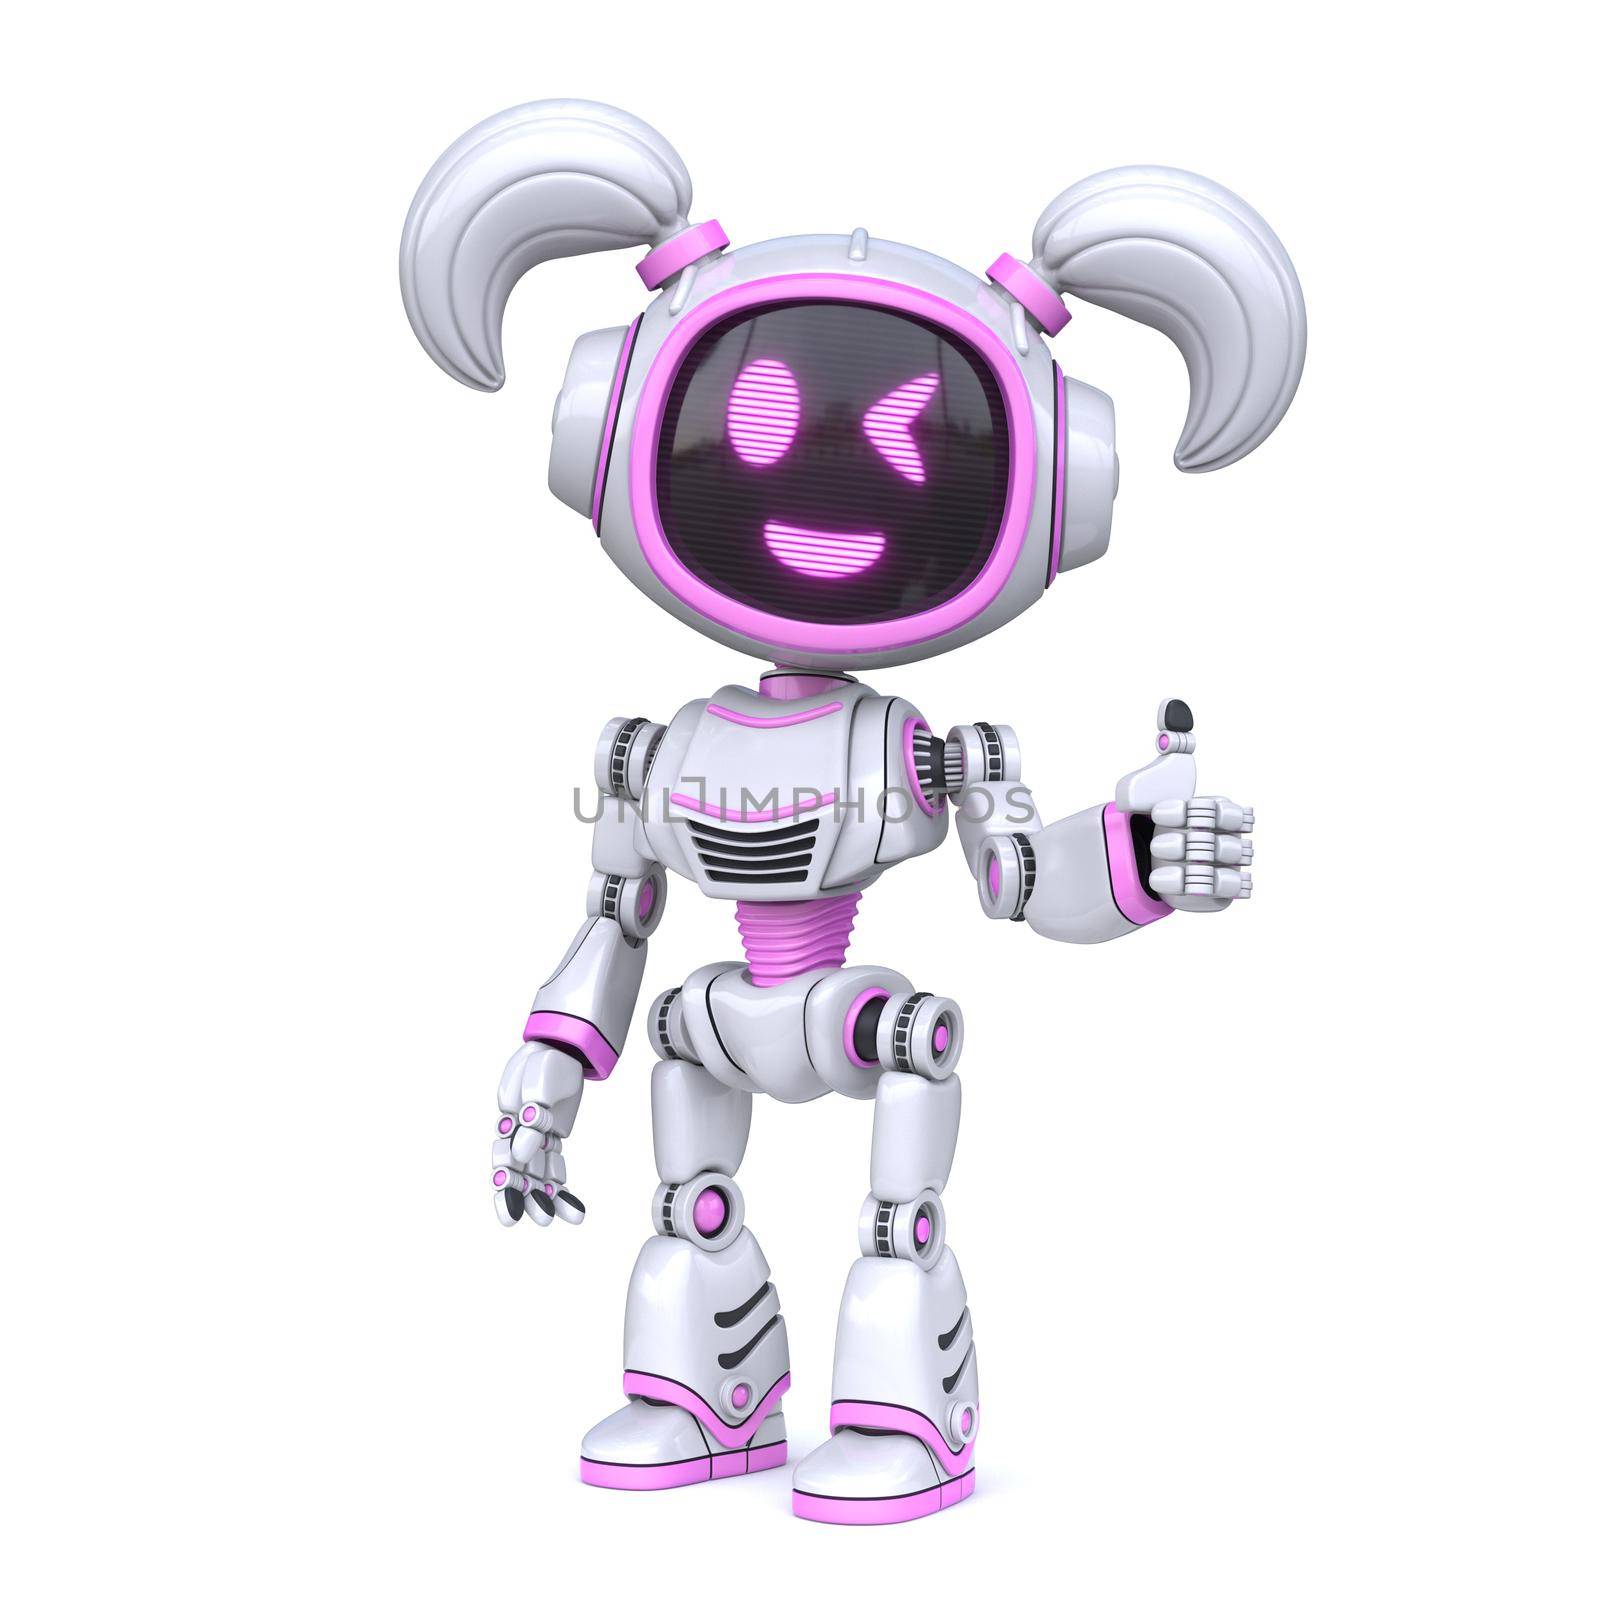 Cute pink girl robot giving thumbs up 3D by djmilic